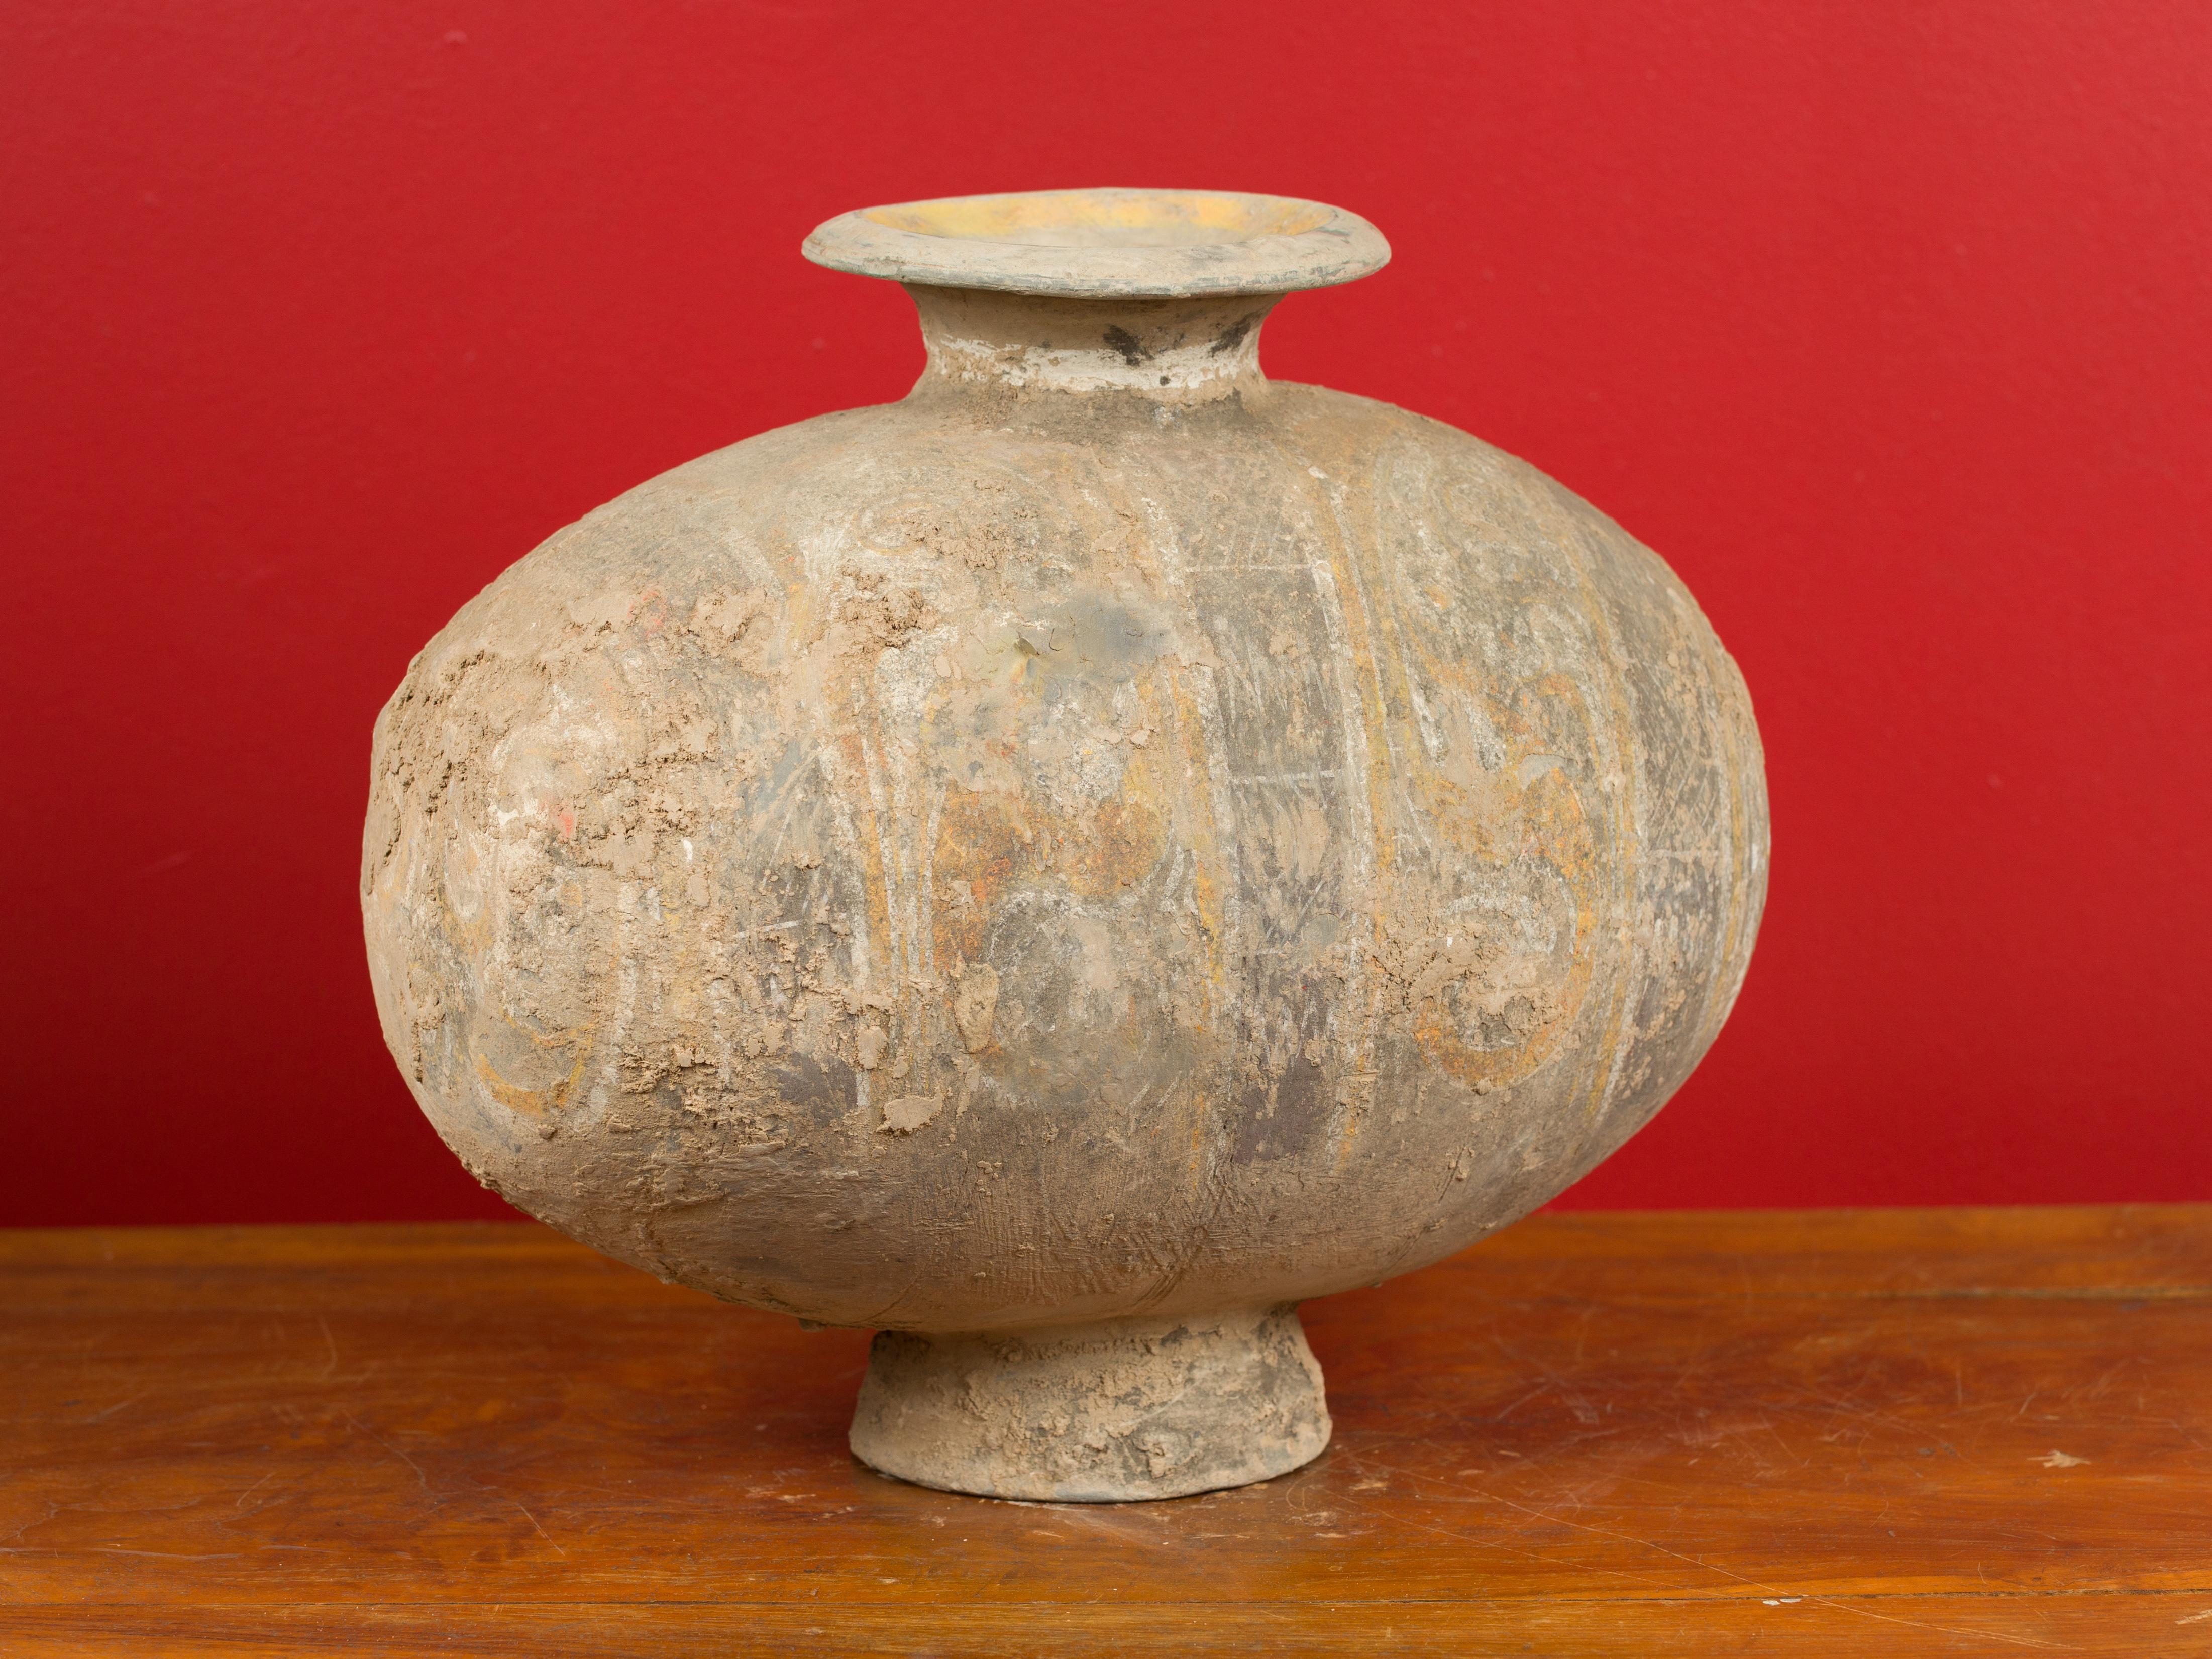 206 BC-200 AD Han Dynasty Antique Terracotta Silk Cocoon Jar with Original Paint 2